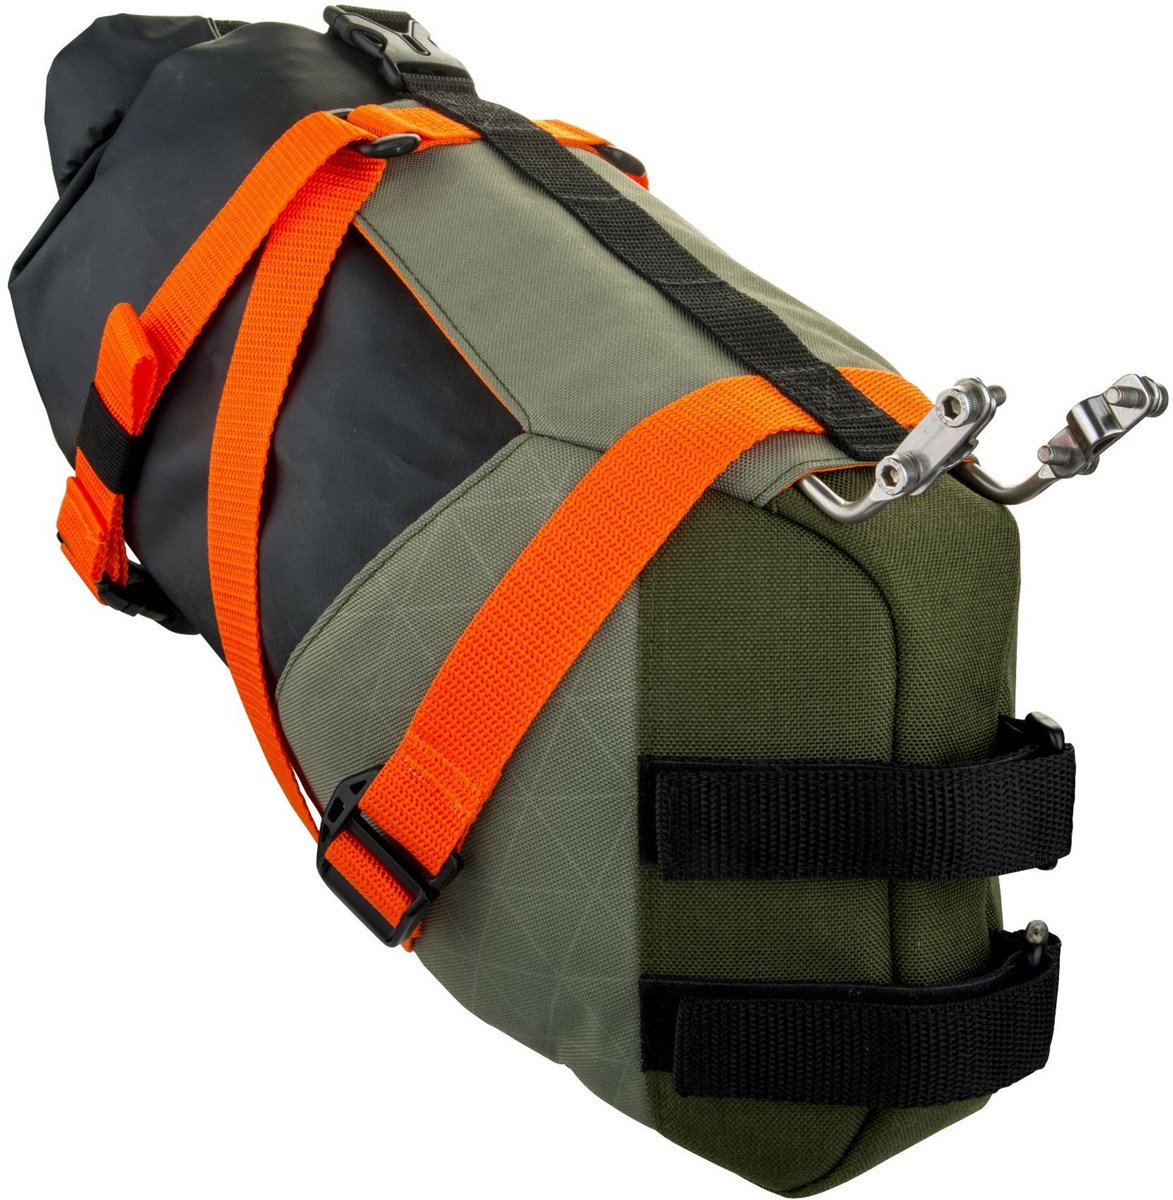 Birzman Packman Saddle Pack Bag with Waterproof Carrier product image